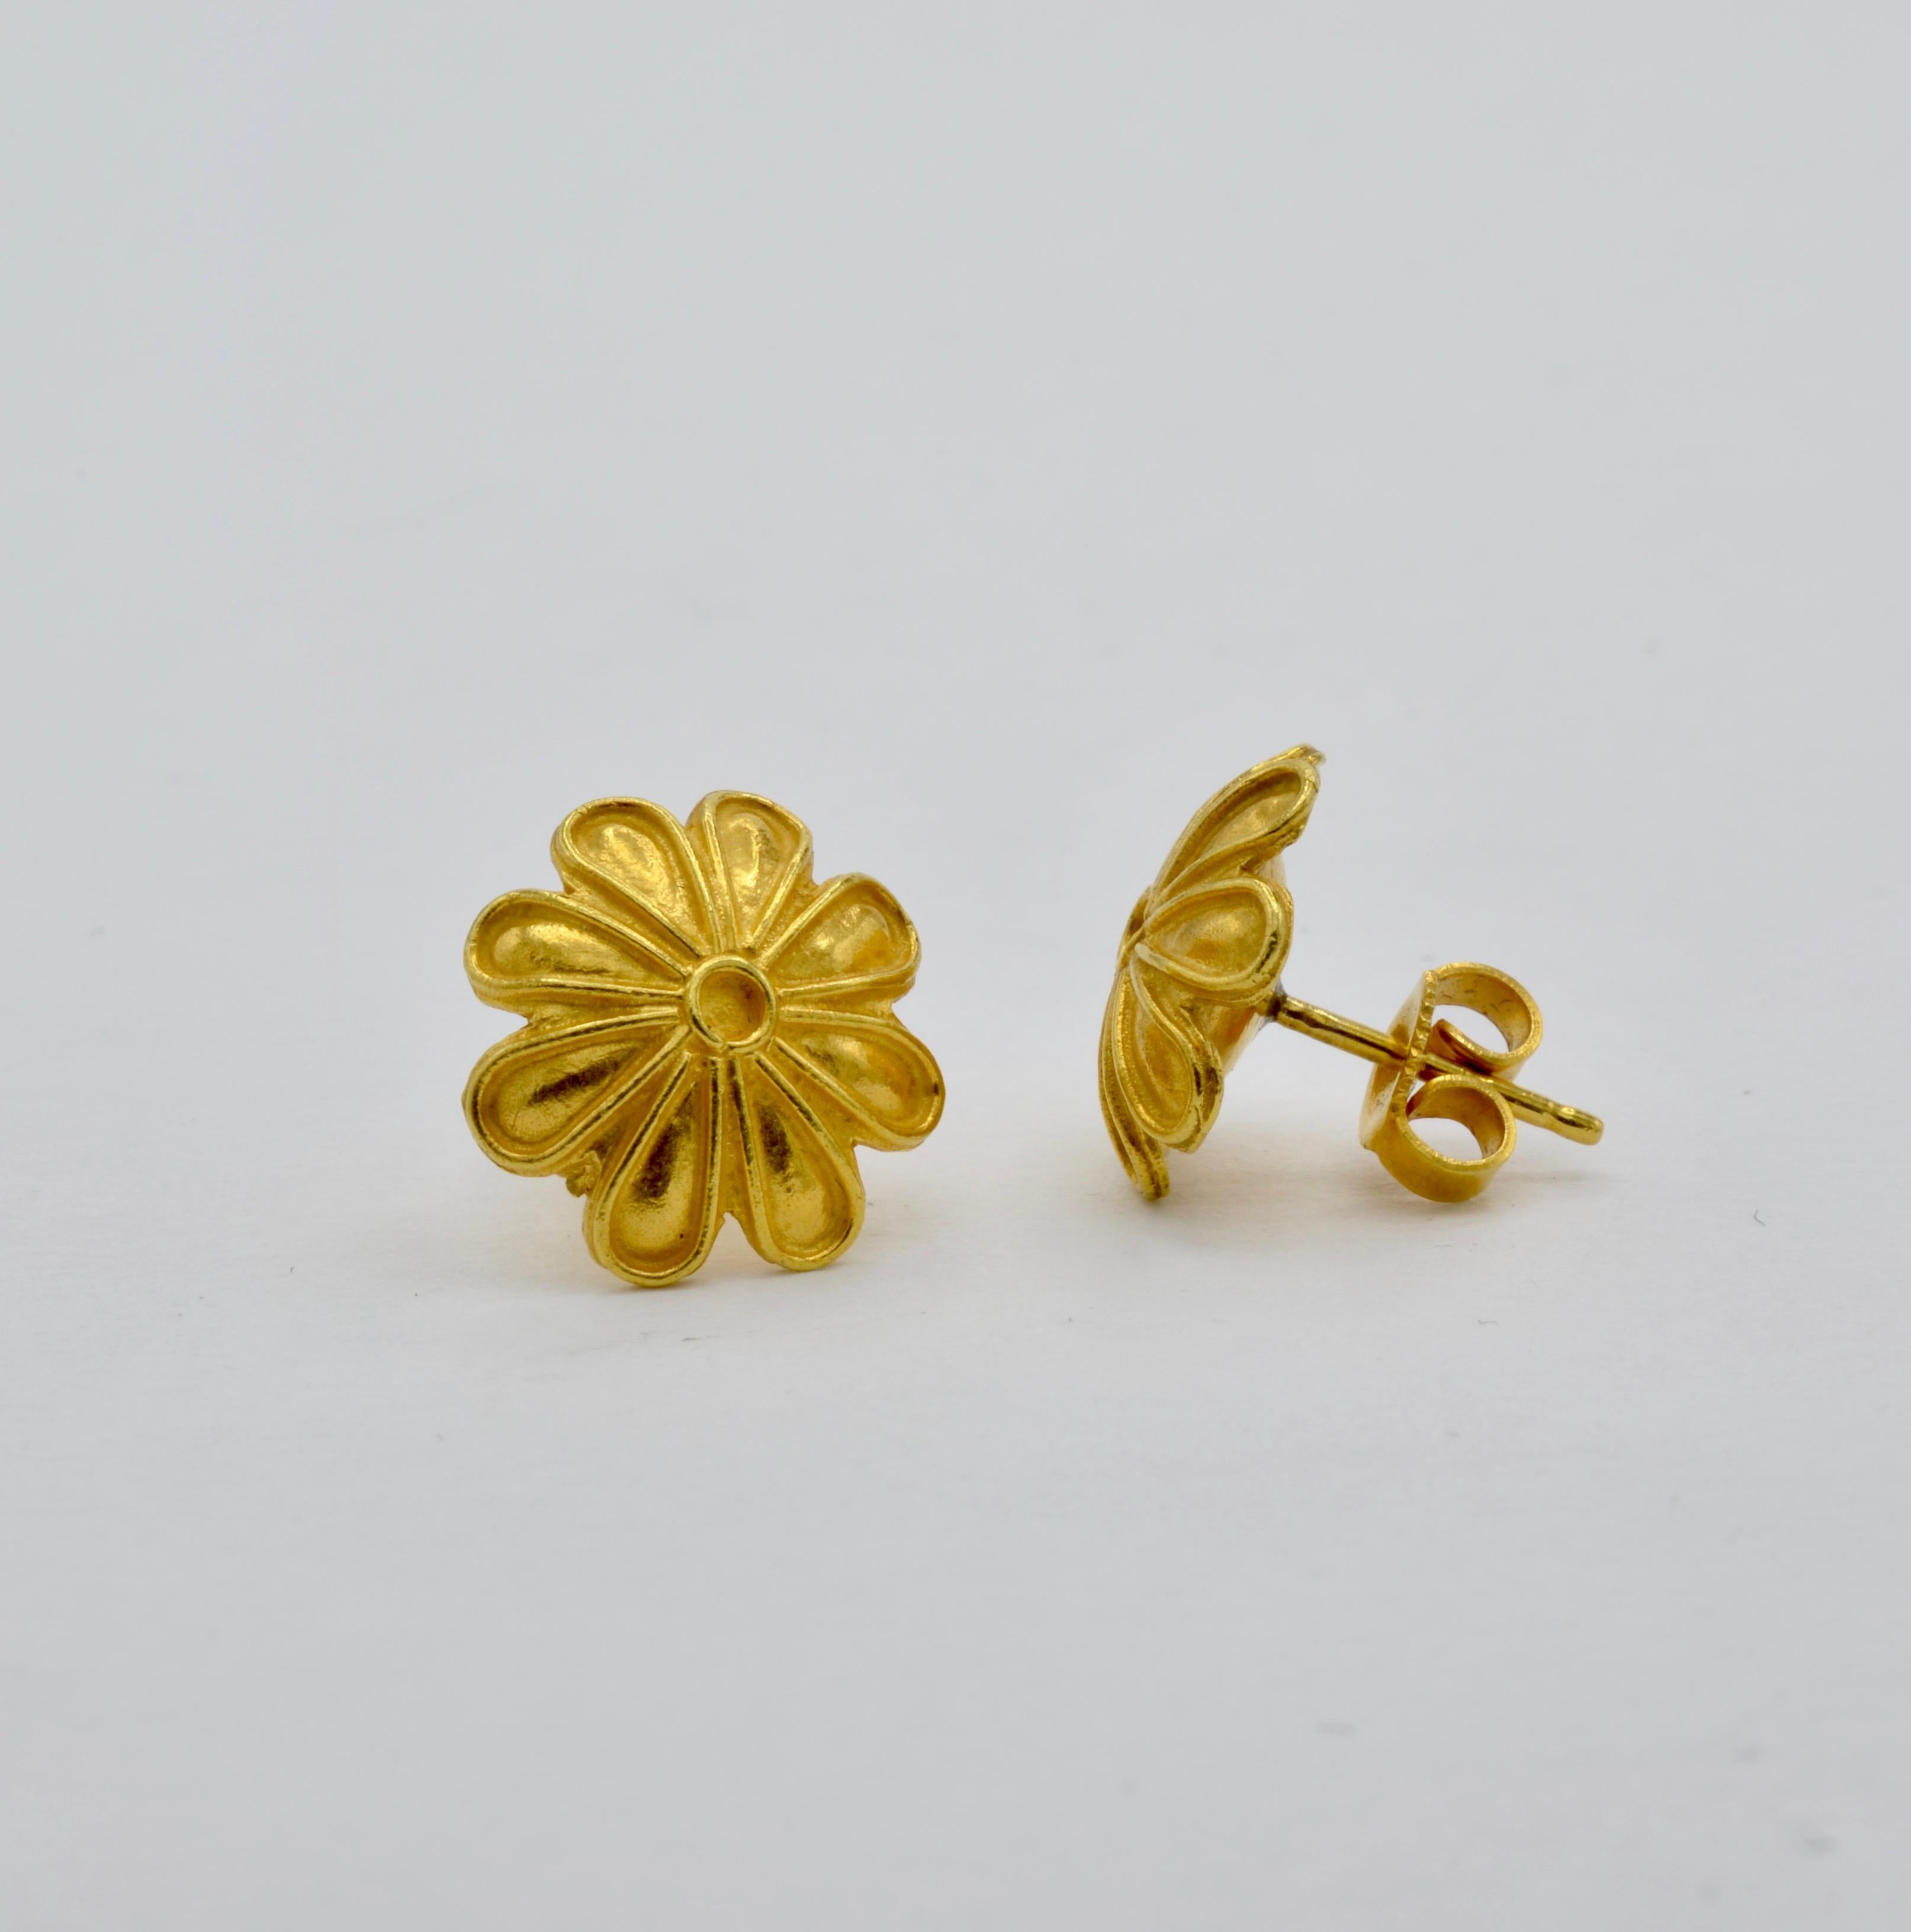 These statement 18K yellow gold flower earrings are a beautiful museum reproduction curated for your personal collection. The bright yellow of the high carat gold creates a regal fashion timeless throughout the centuries and fit for a queen. 